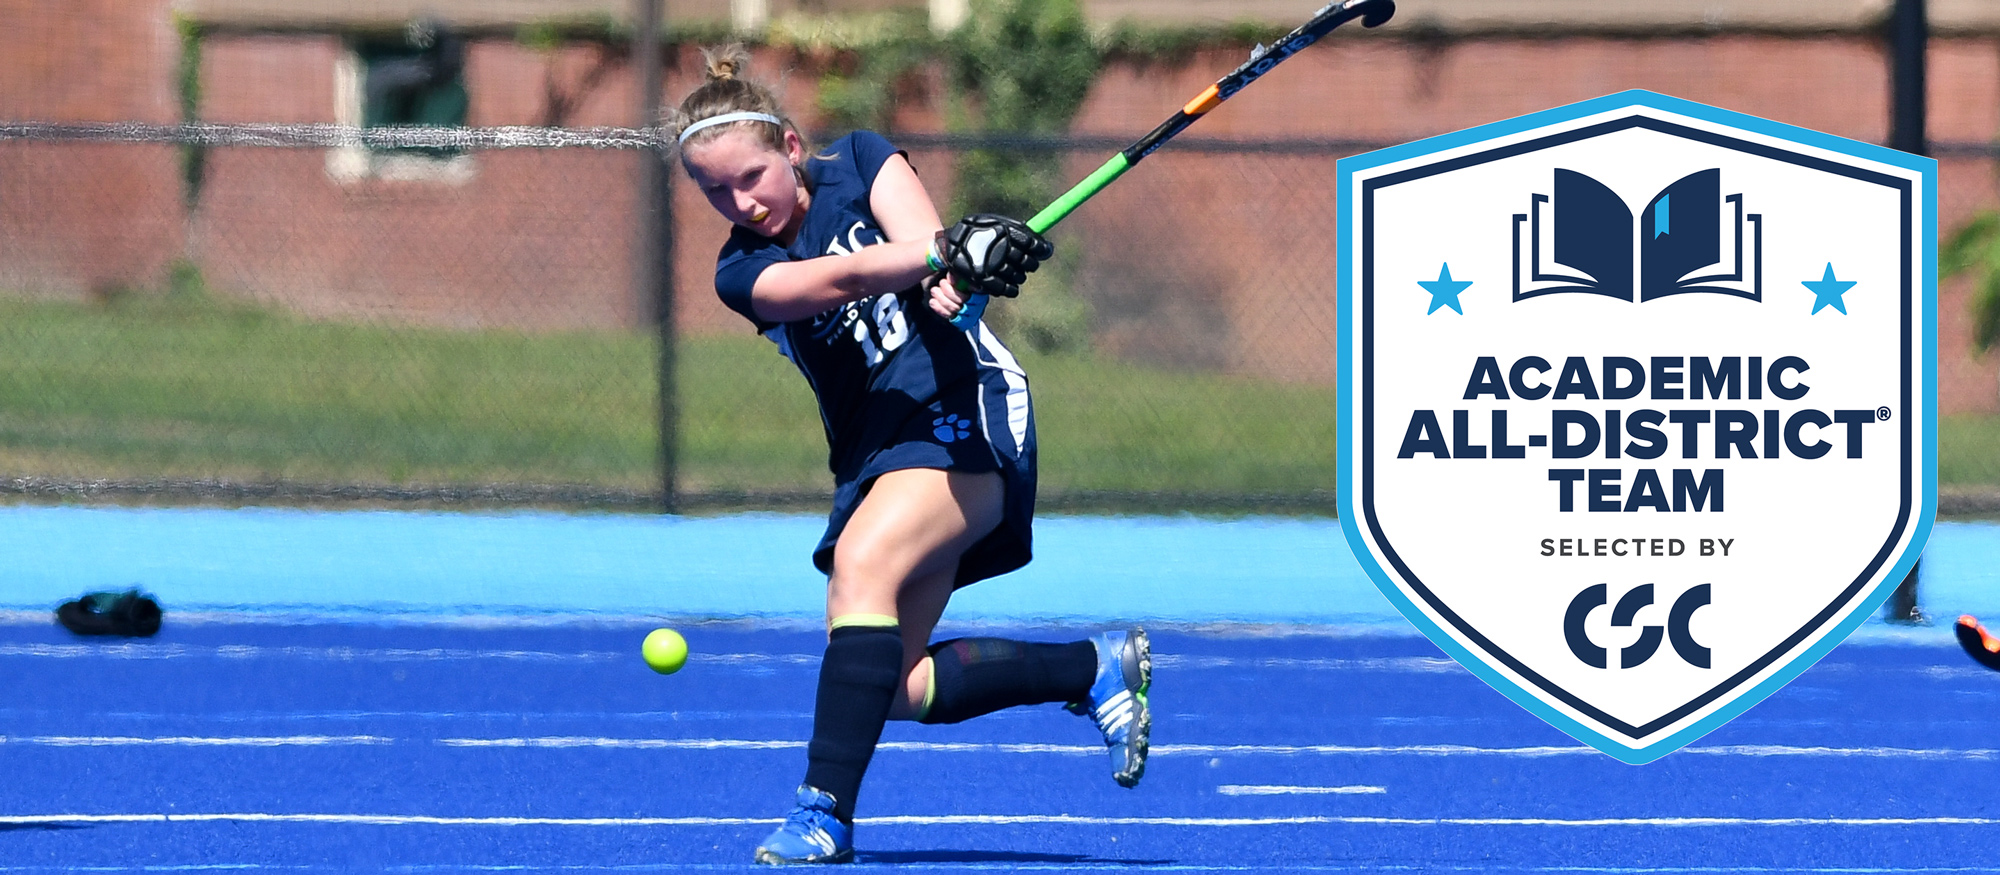 Phoebe Aaronson was one of five Lyons student-athletes to receive 2022-23 CSC Academic All-District At-Large honors, announced May 25, 2023. (RJB Sports)